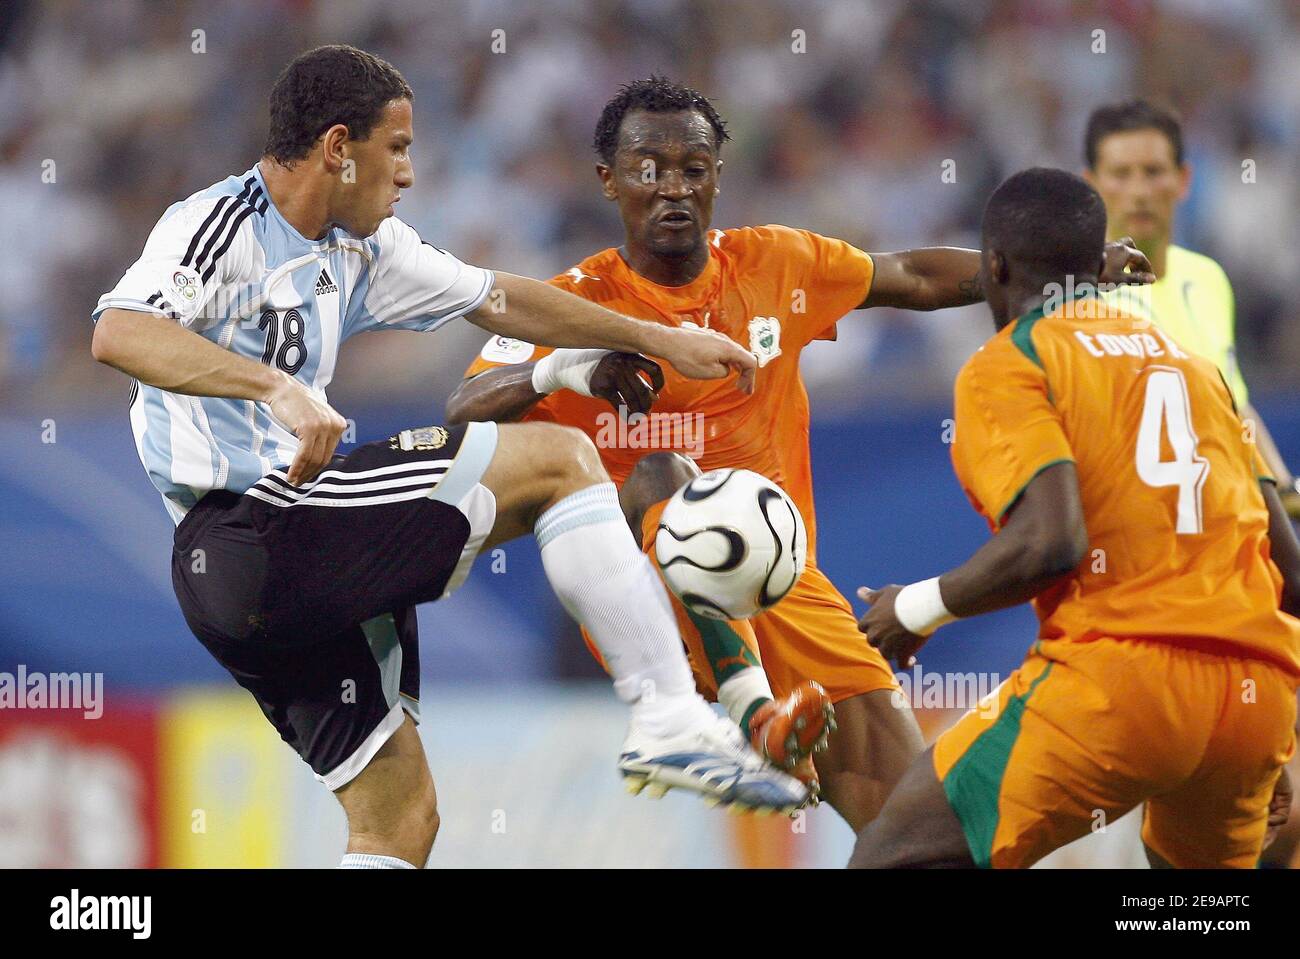 Argentina's Maxi Rodriguez and Ivory Coast's Kolo Toure during the World Cup 2006, World Cup 2006, Group C, Argentina vs Ivory Coast in Hamburg, Germany on June 10, 2006. Argentina won 2-1. Photo by Christian Liewig/ABACAPRESS.COM Stock Photo